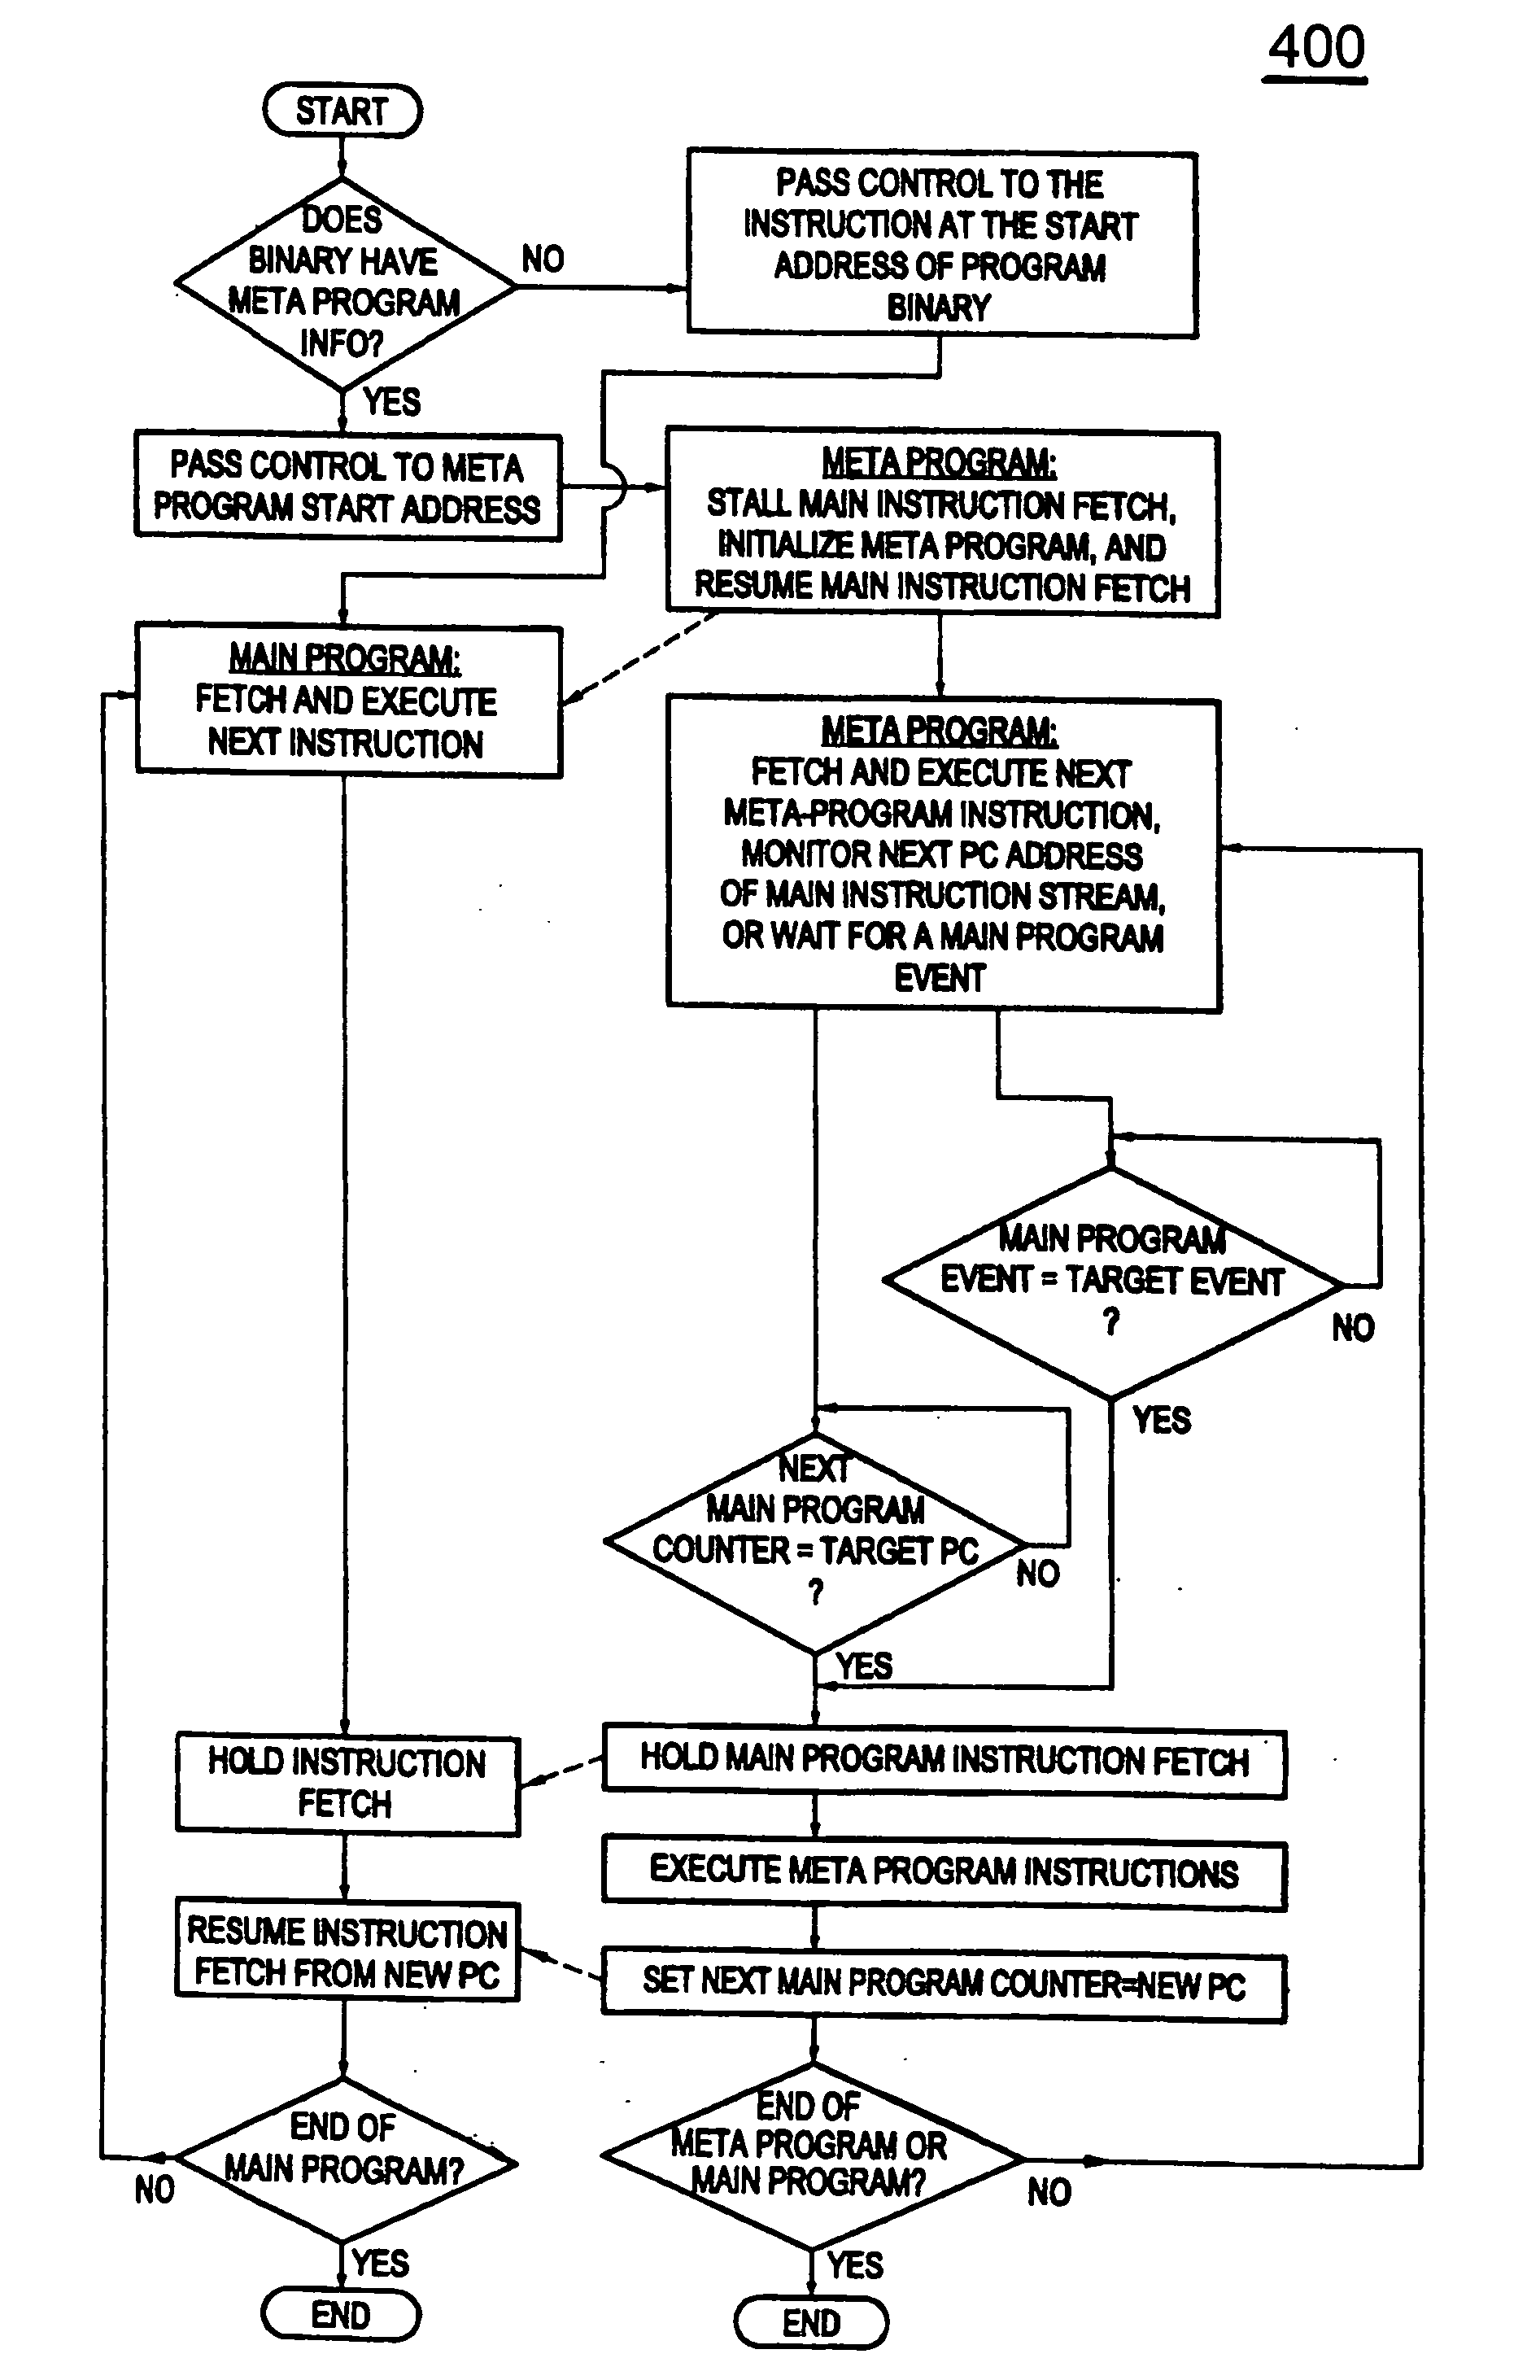 Method and apparatus for fast synchronization and out-of-order execution of instructions in a meta-program based computing system